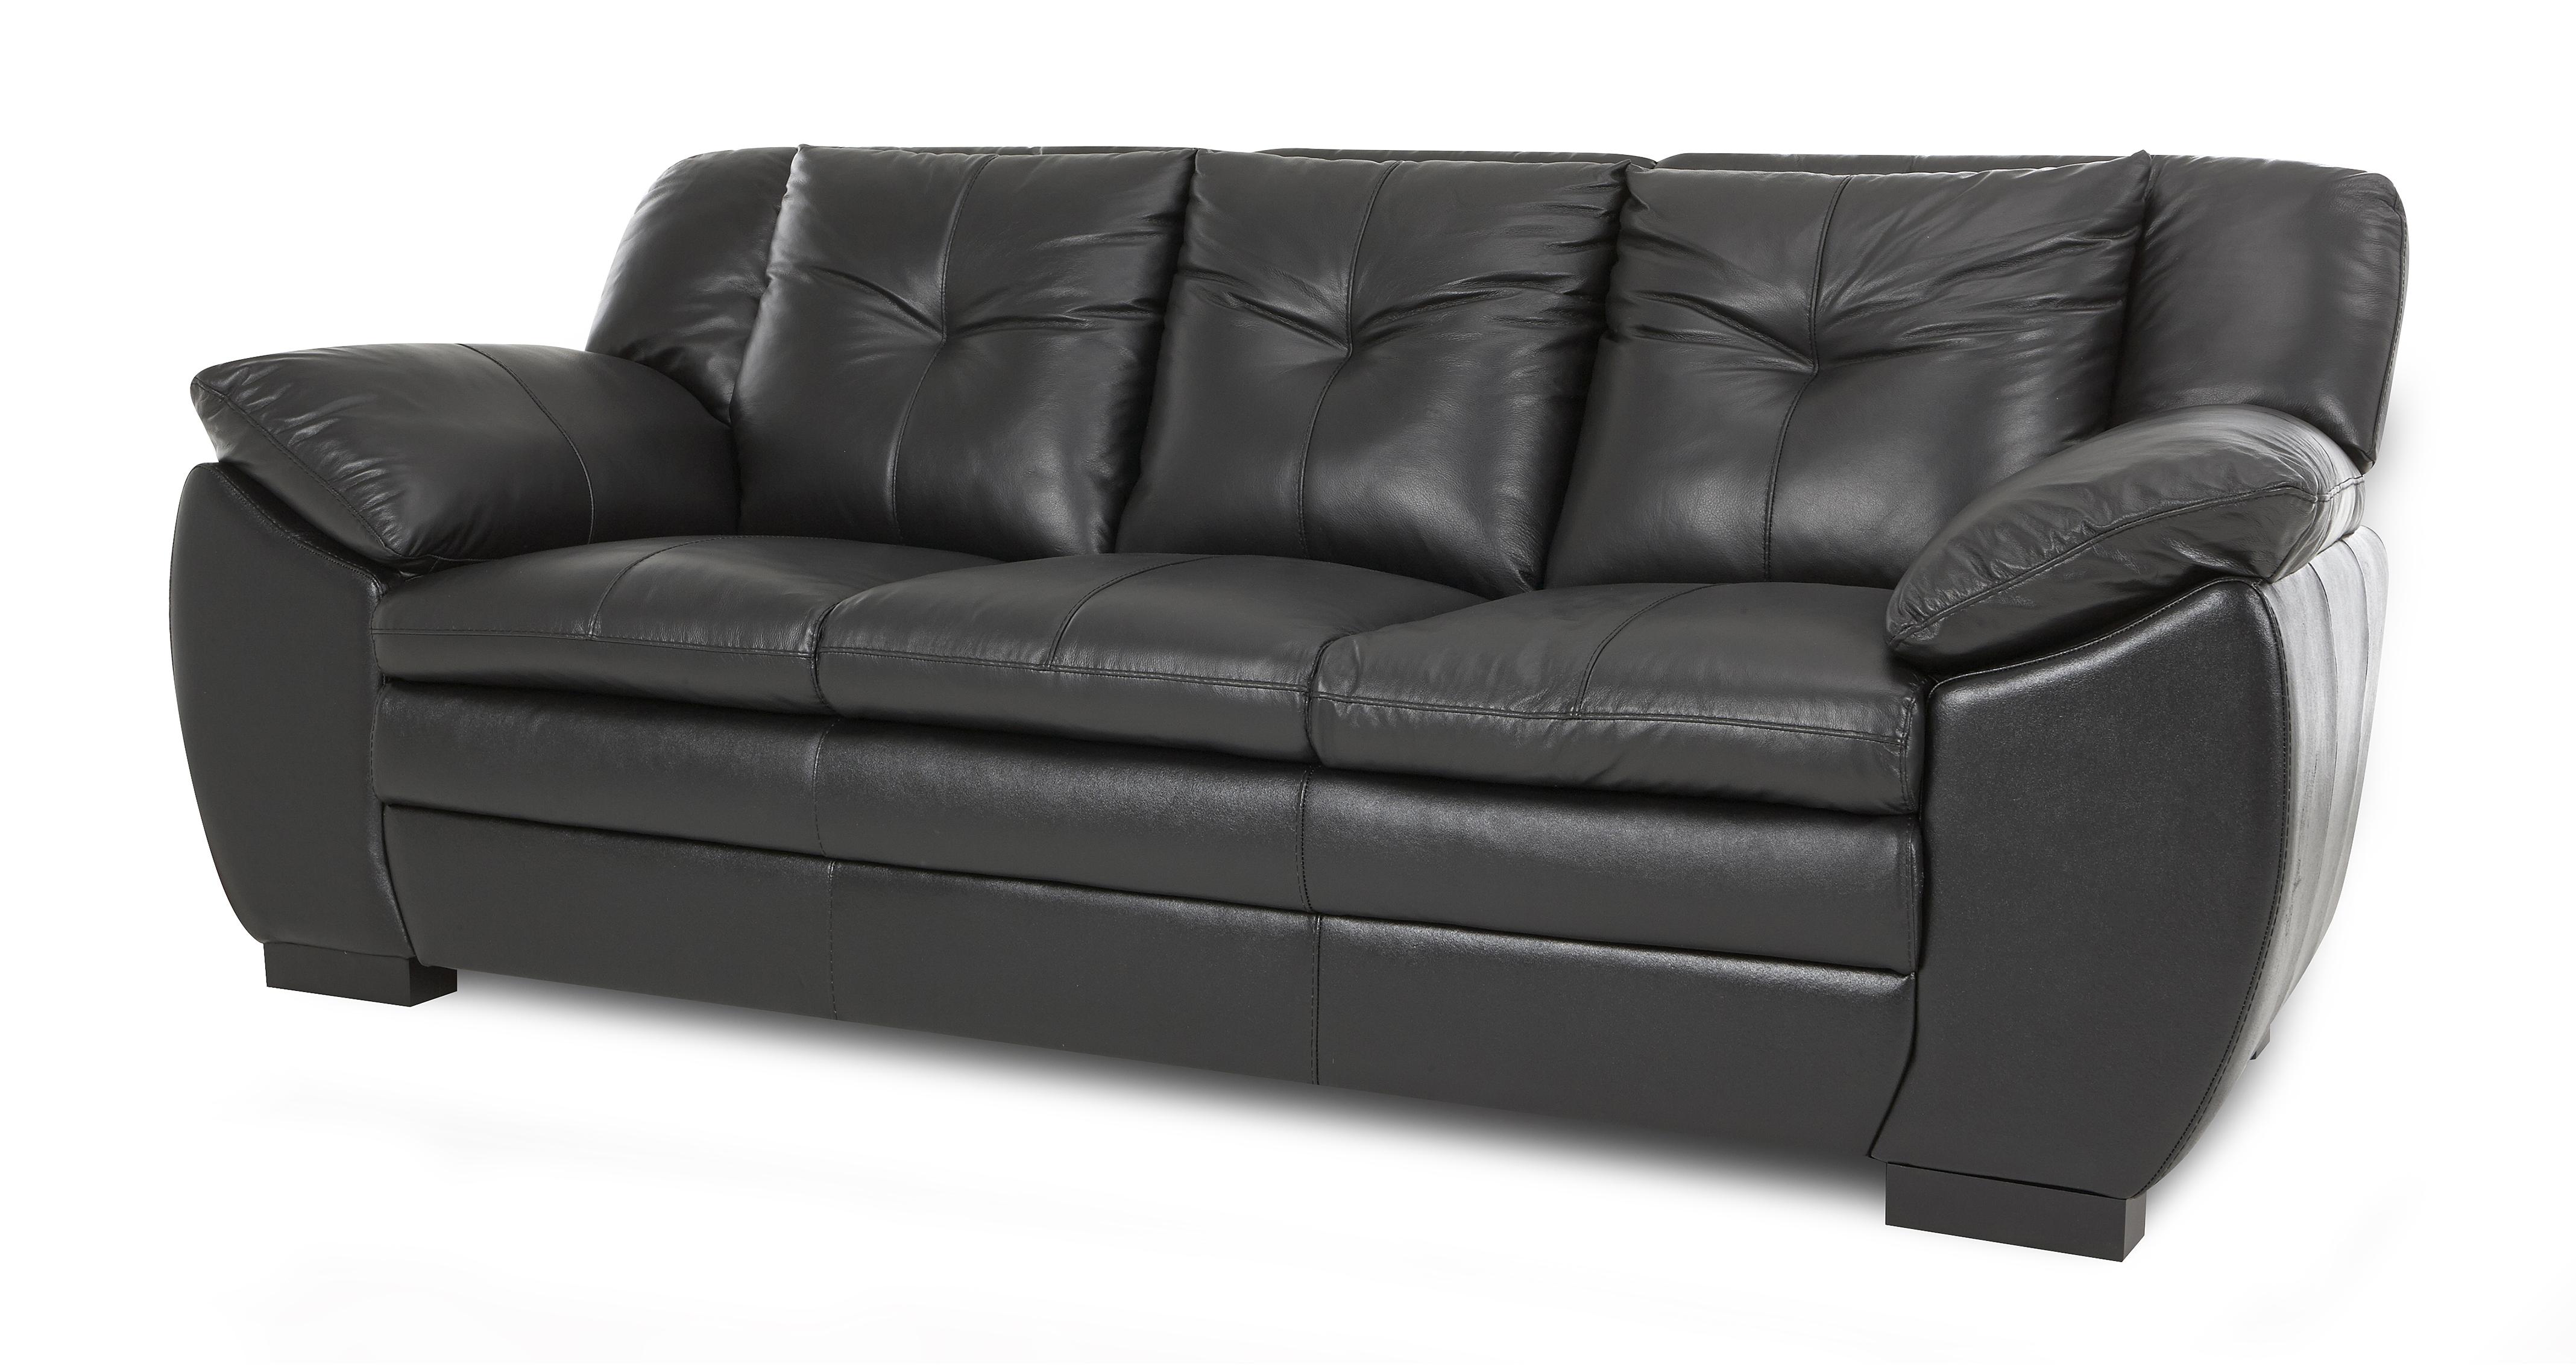 dfs leather sofa creases